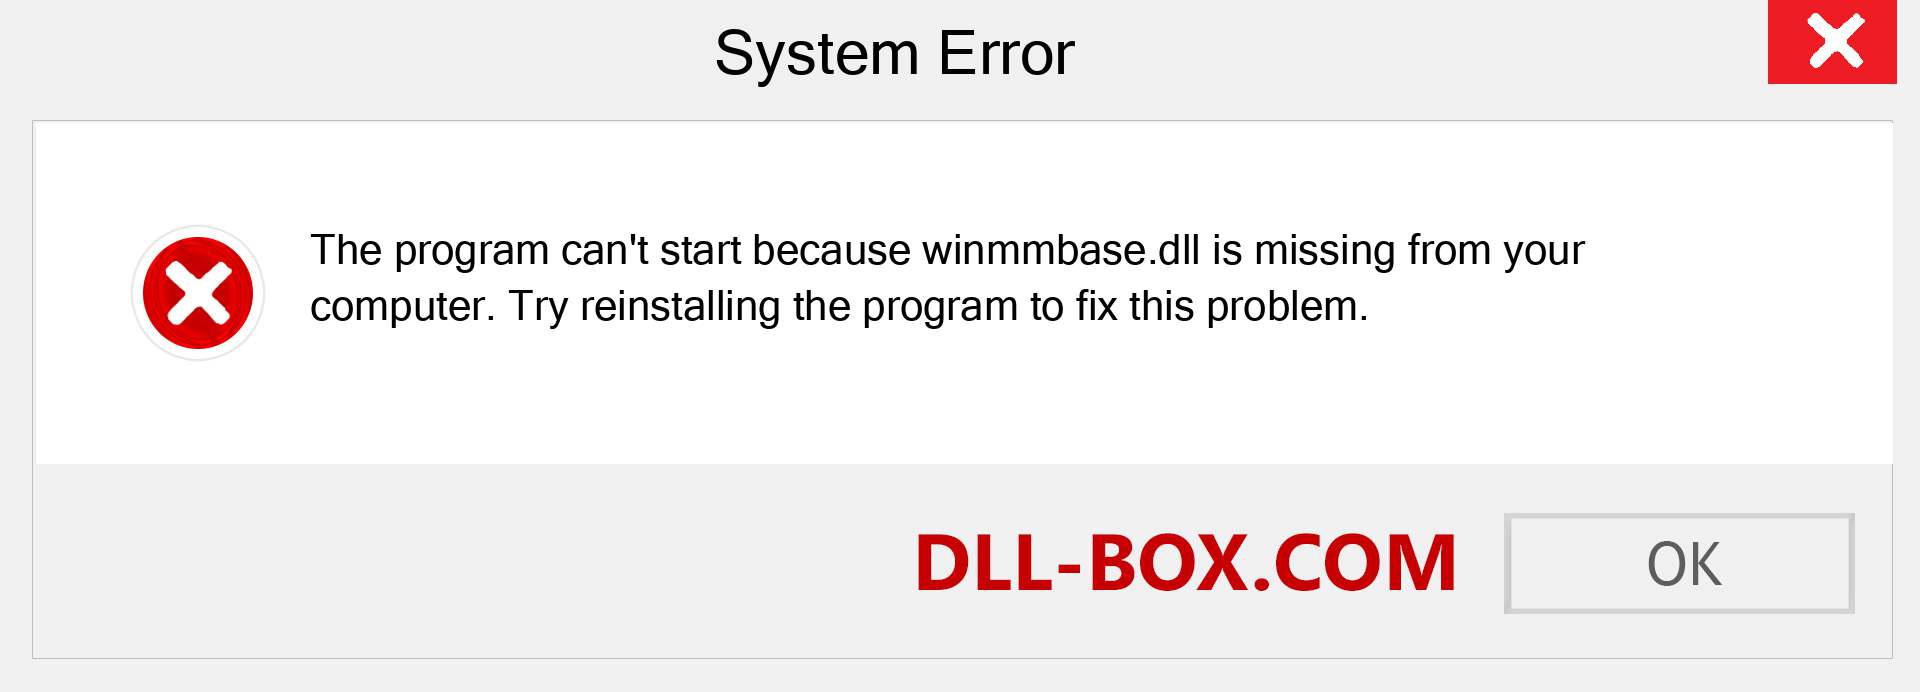  winmmbase.dll file is missing?. Download for Windows 7, 8, 10 - Fix  winmmbase dll Missing Error on Windows, photos, images